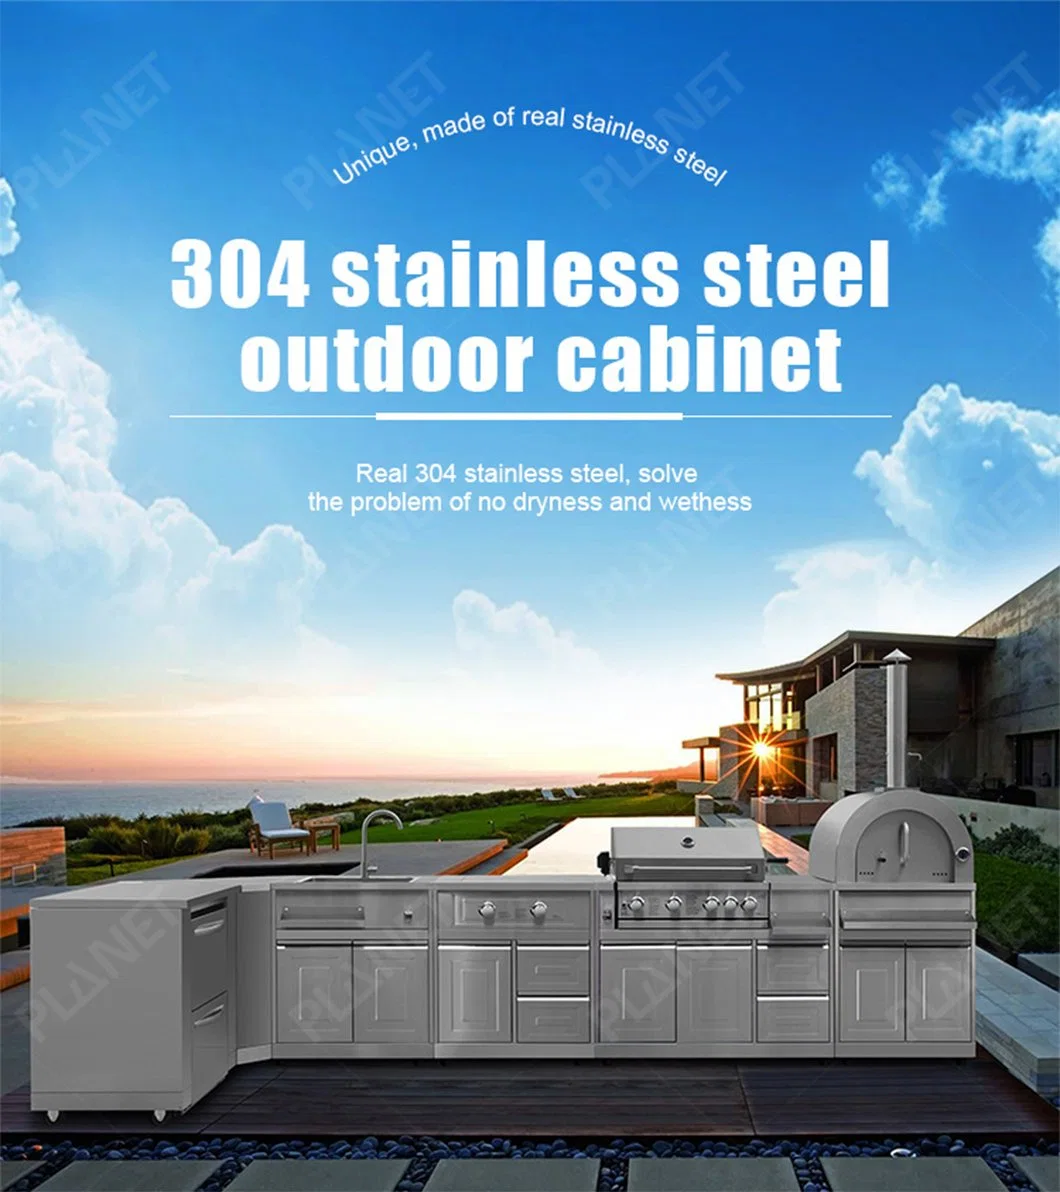 Stainless Steel 6 Burners BBQ Smokers Built in Kitchen Cabinet Outdoor Charcoal Gas BBQ Grills